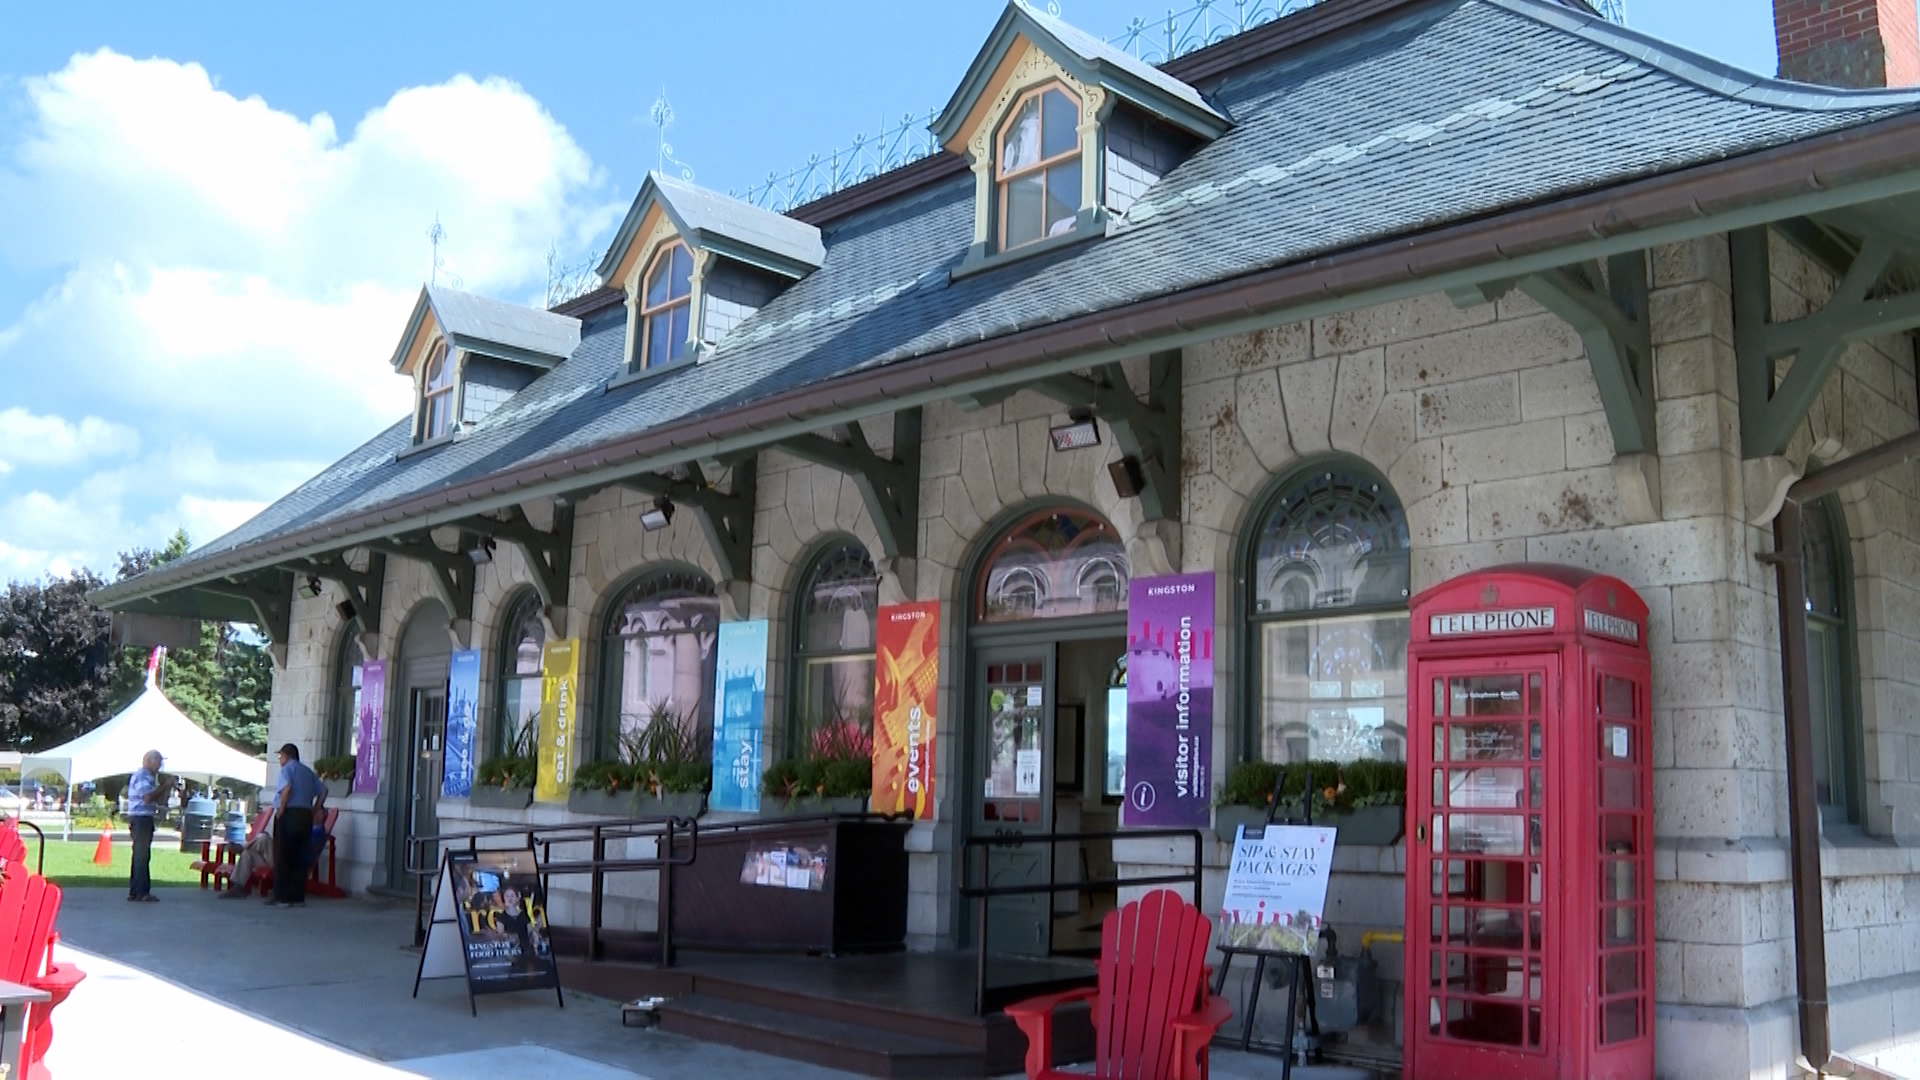 Kingston locals optimistic about the start to an unofficial tourism
season